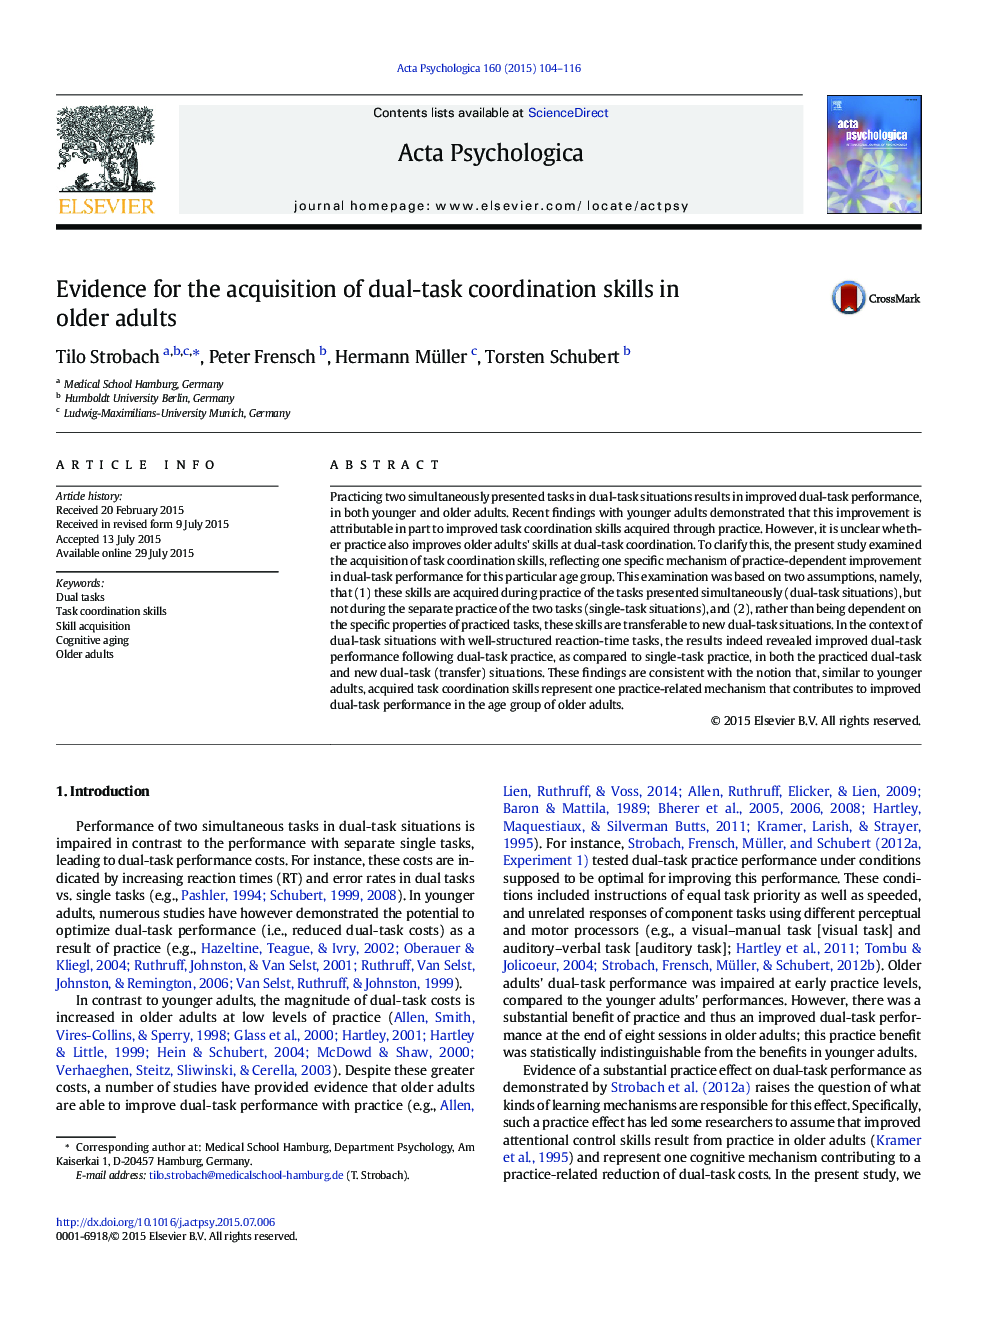 Evidence for the acquisition of dual-task coordination skills in older adults